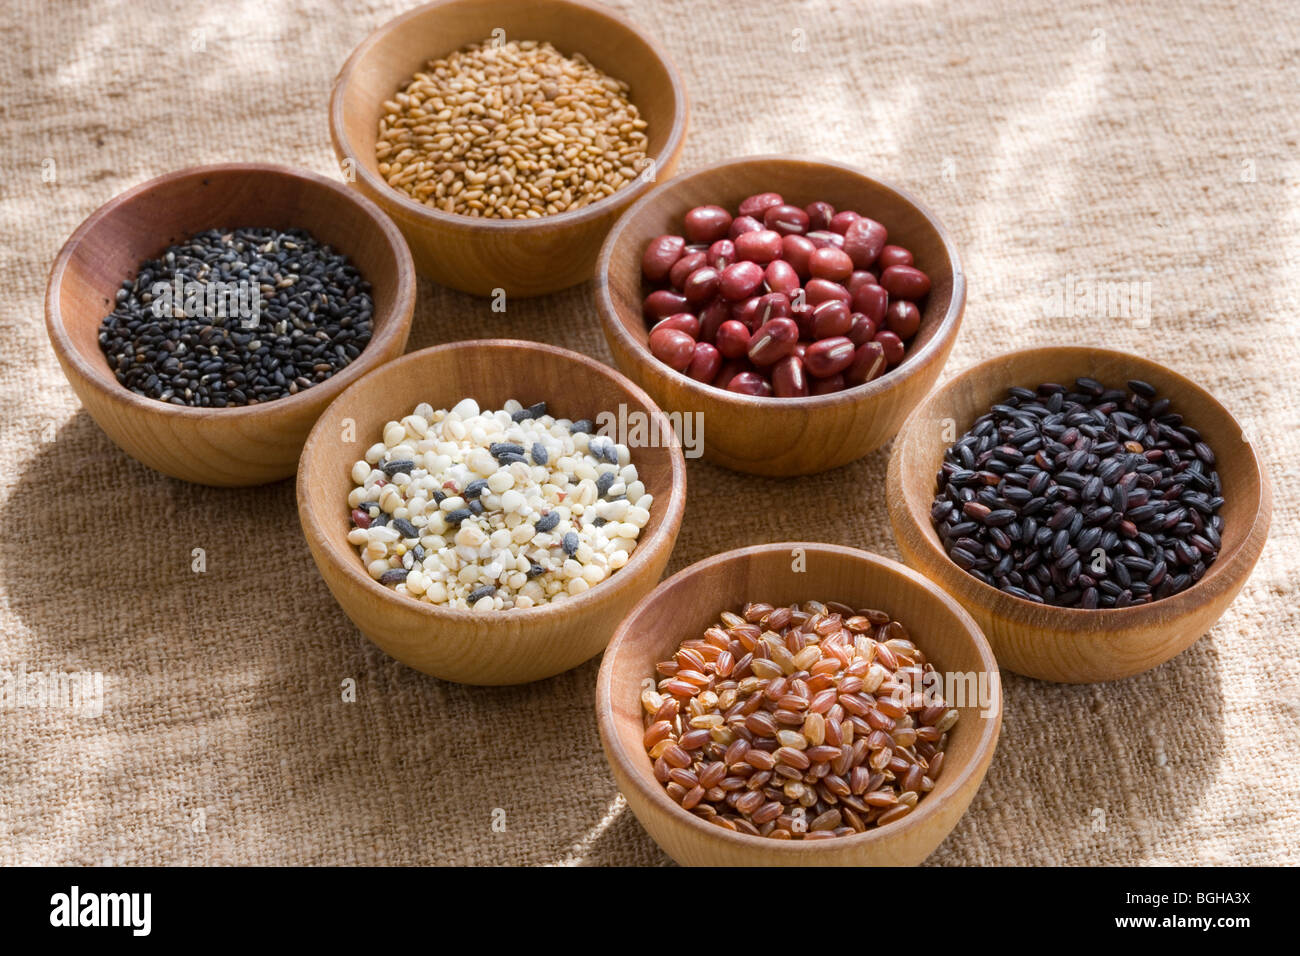 Wooden bowls of different grains and beans Stock Photo